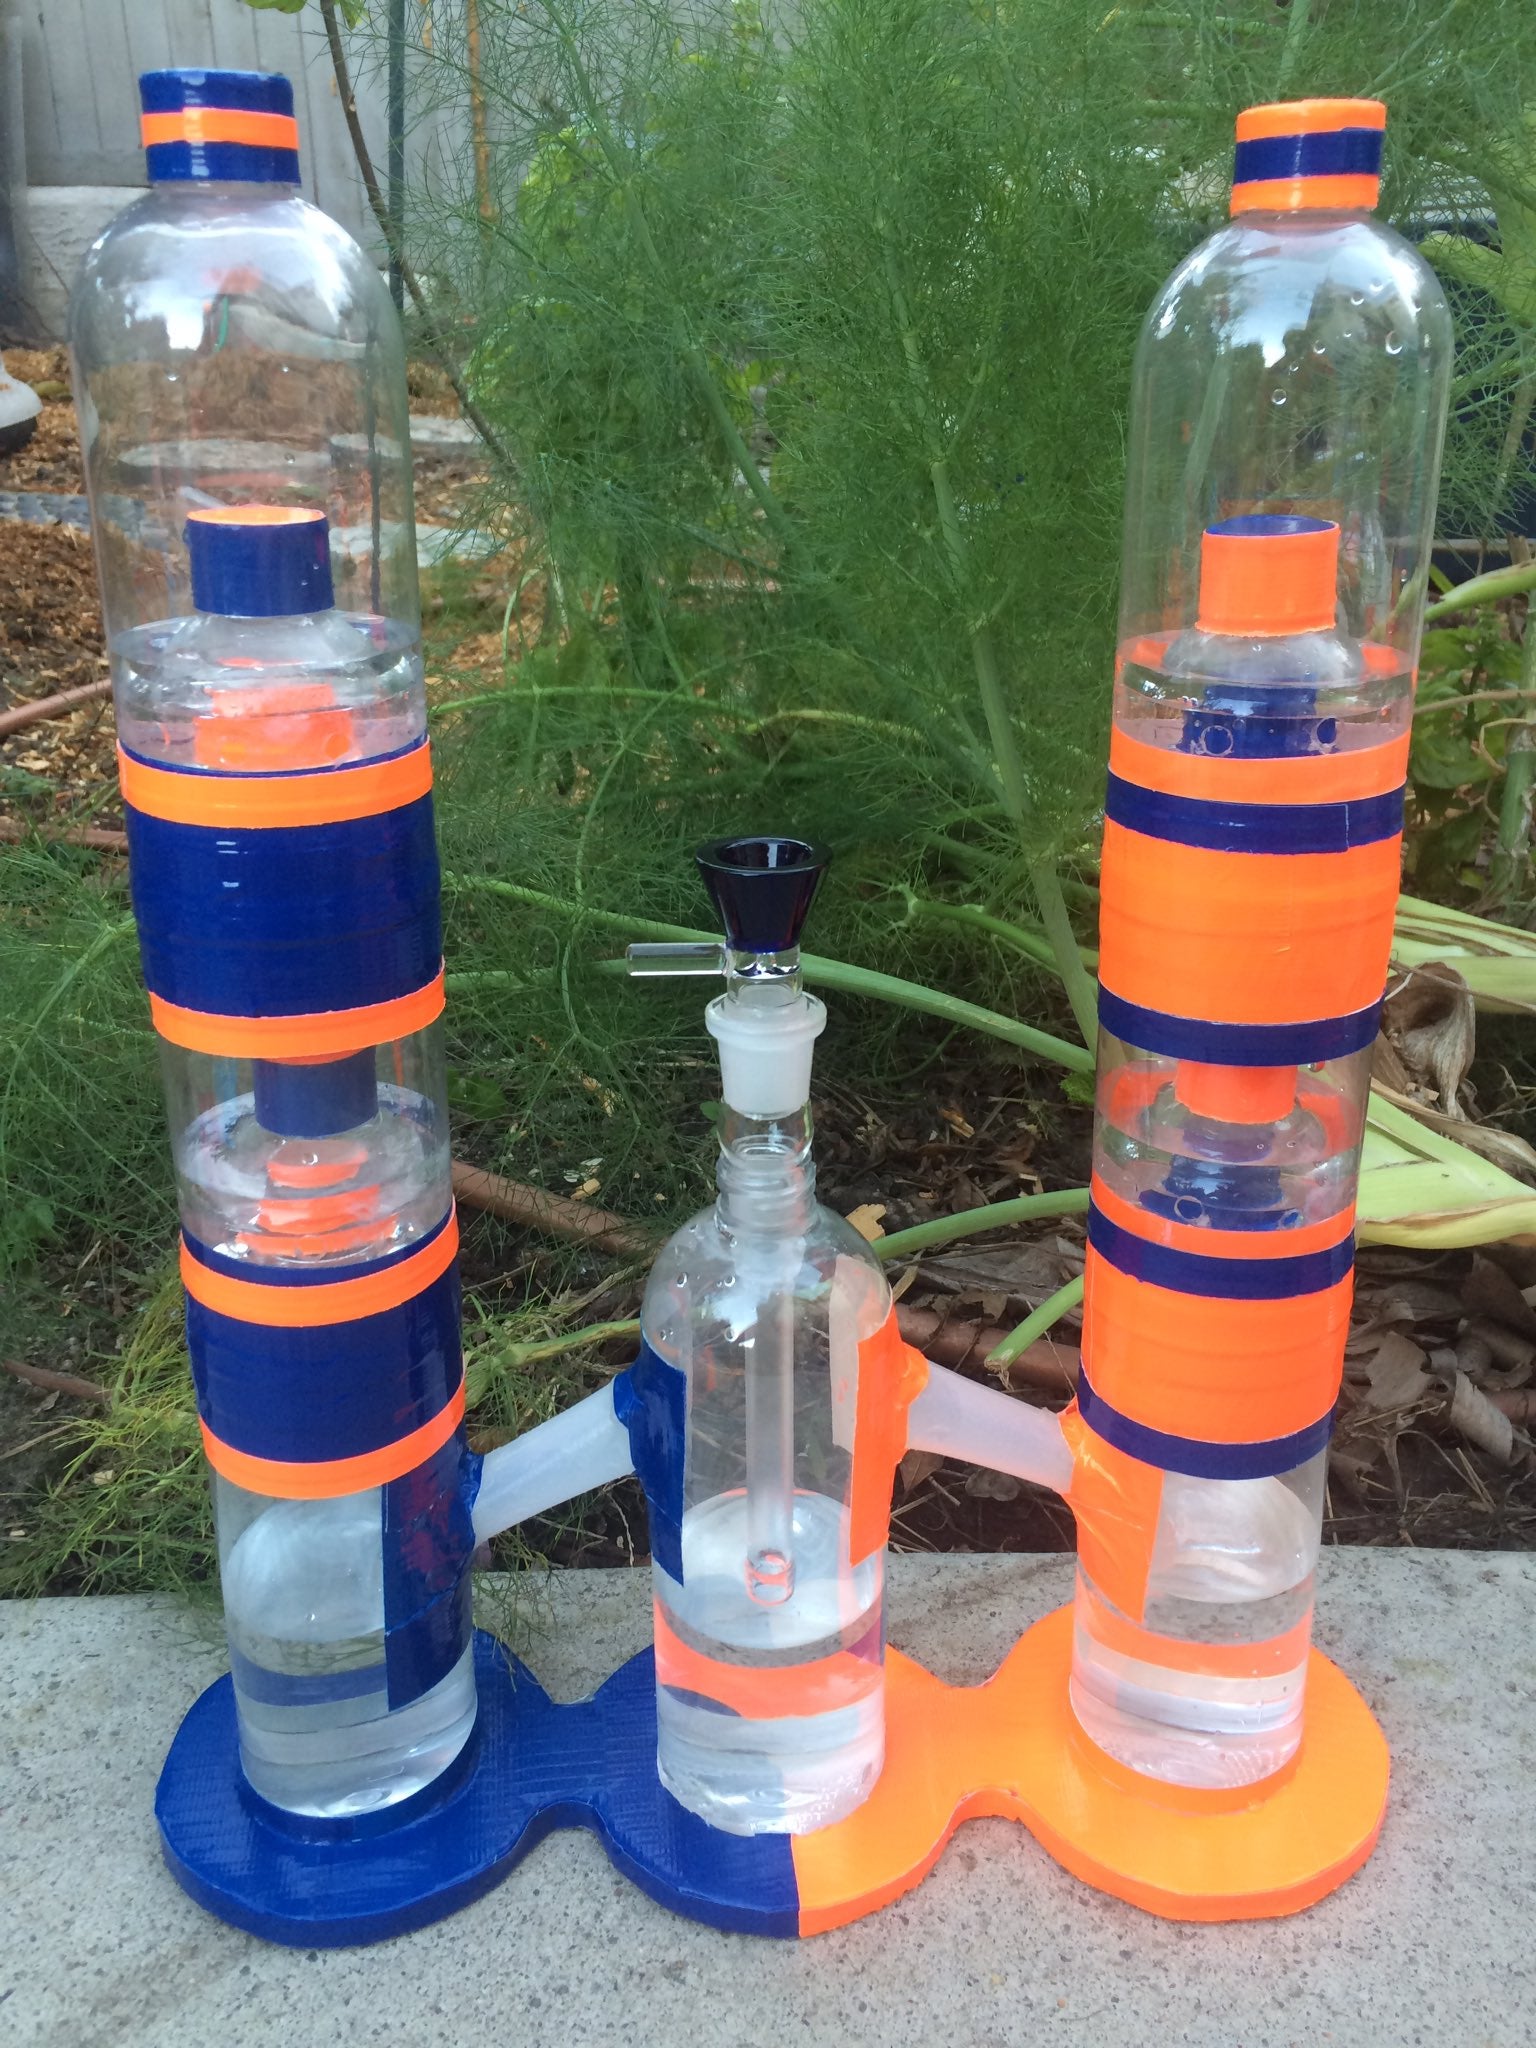 How to Make a Water Bottle Bong at Home